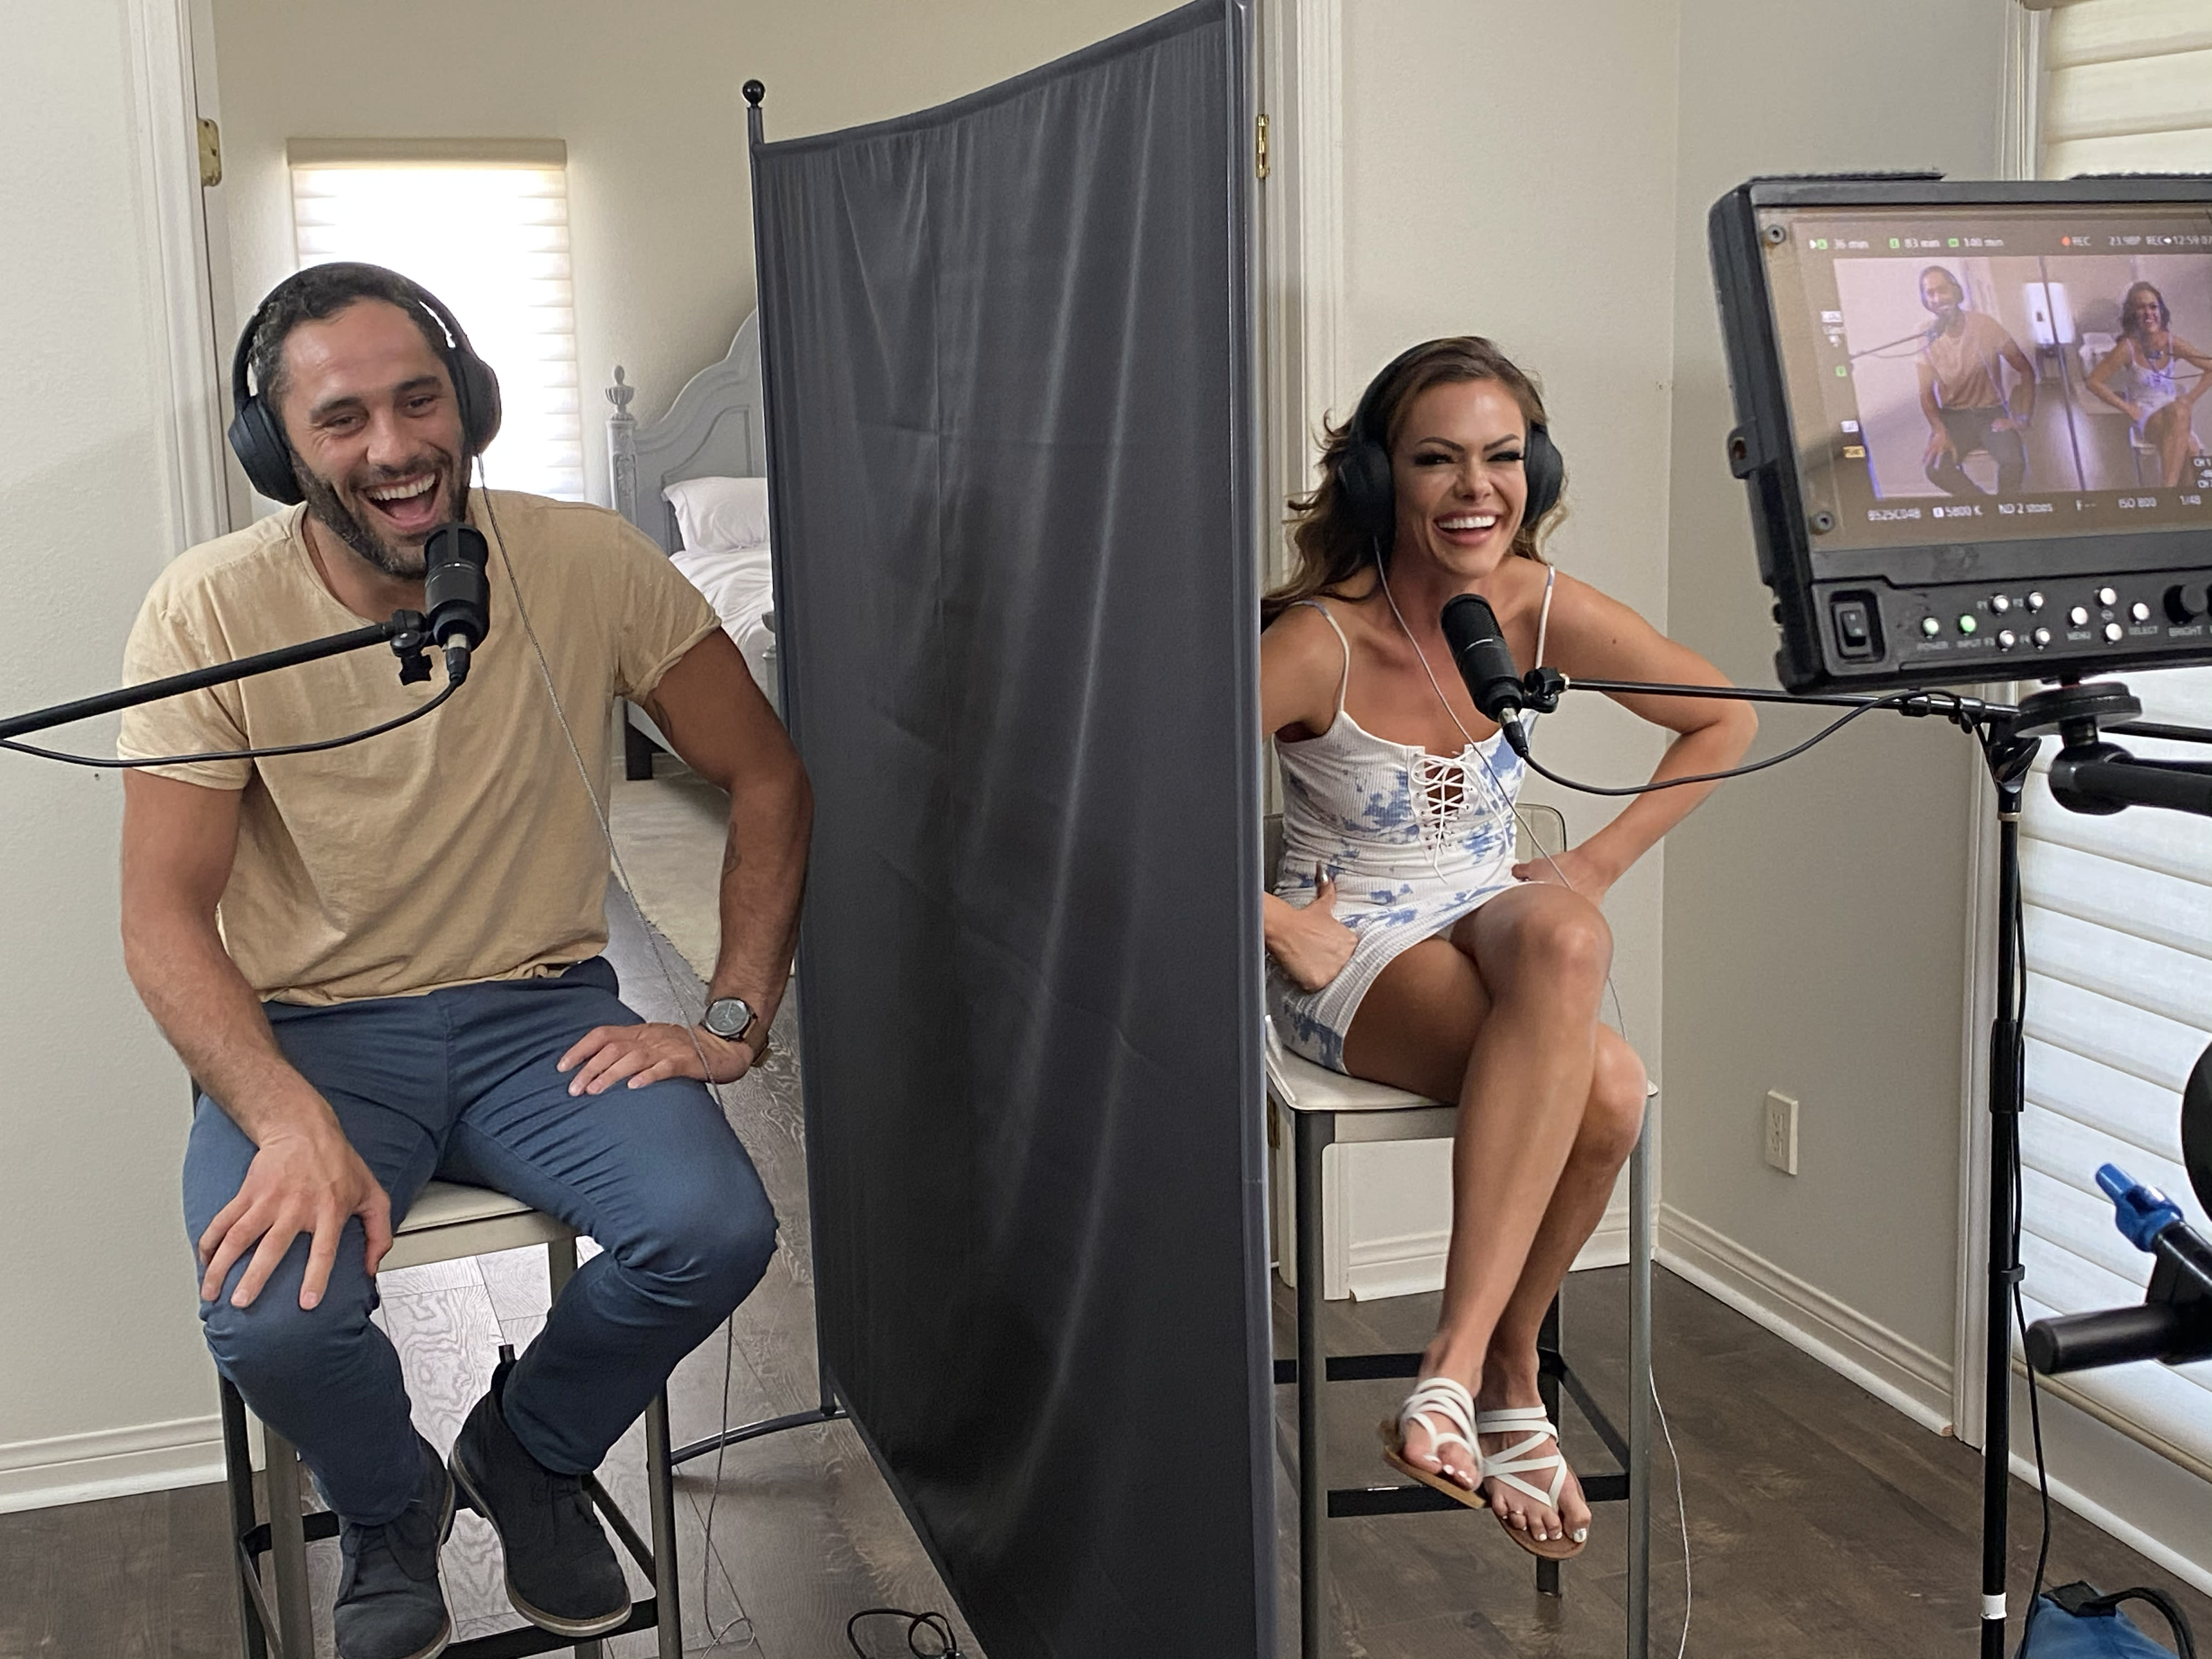 New Reality Studio Bellesa Blind Date launches on Bellesa Plus, the worlds fastest growing unlimited porn streaming service Bellesa